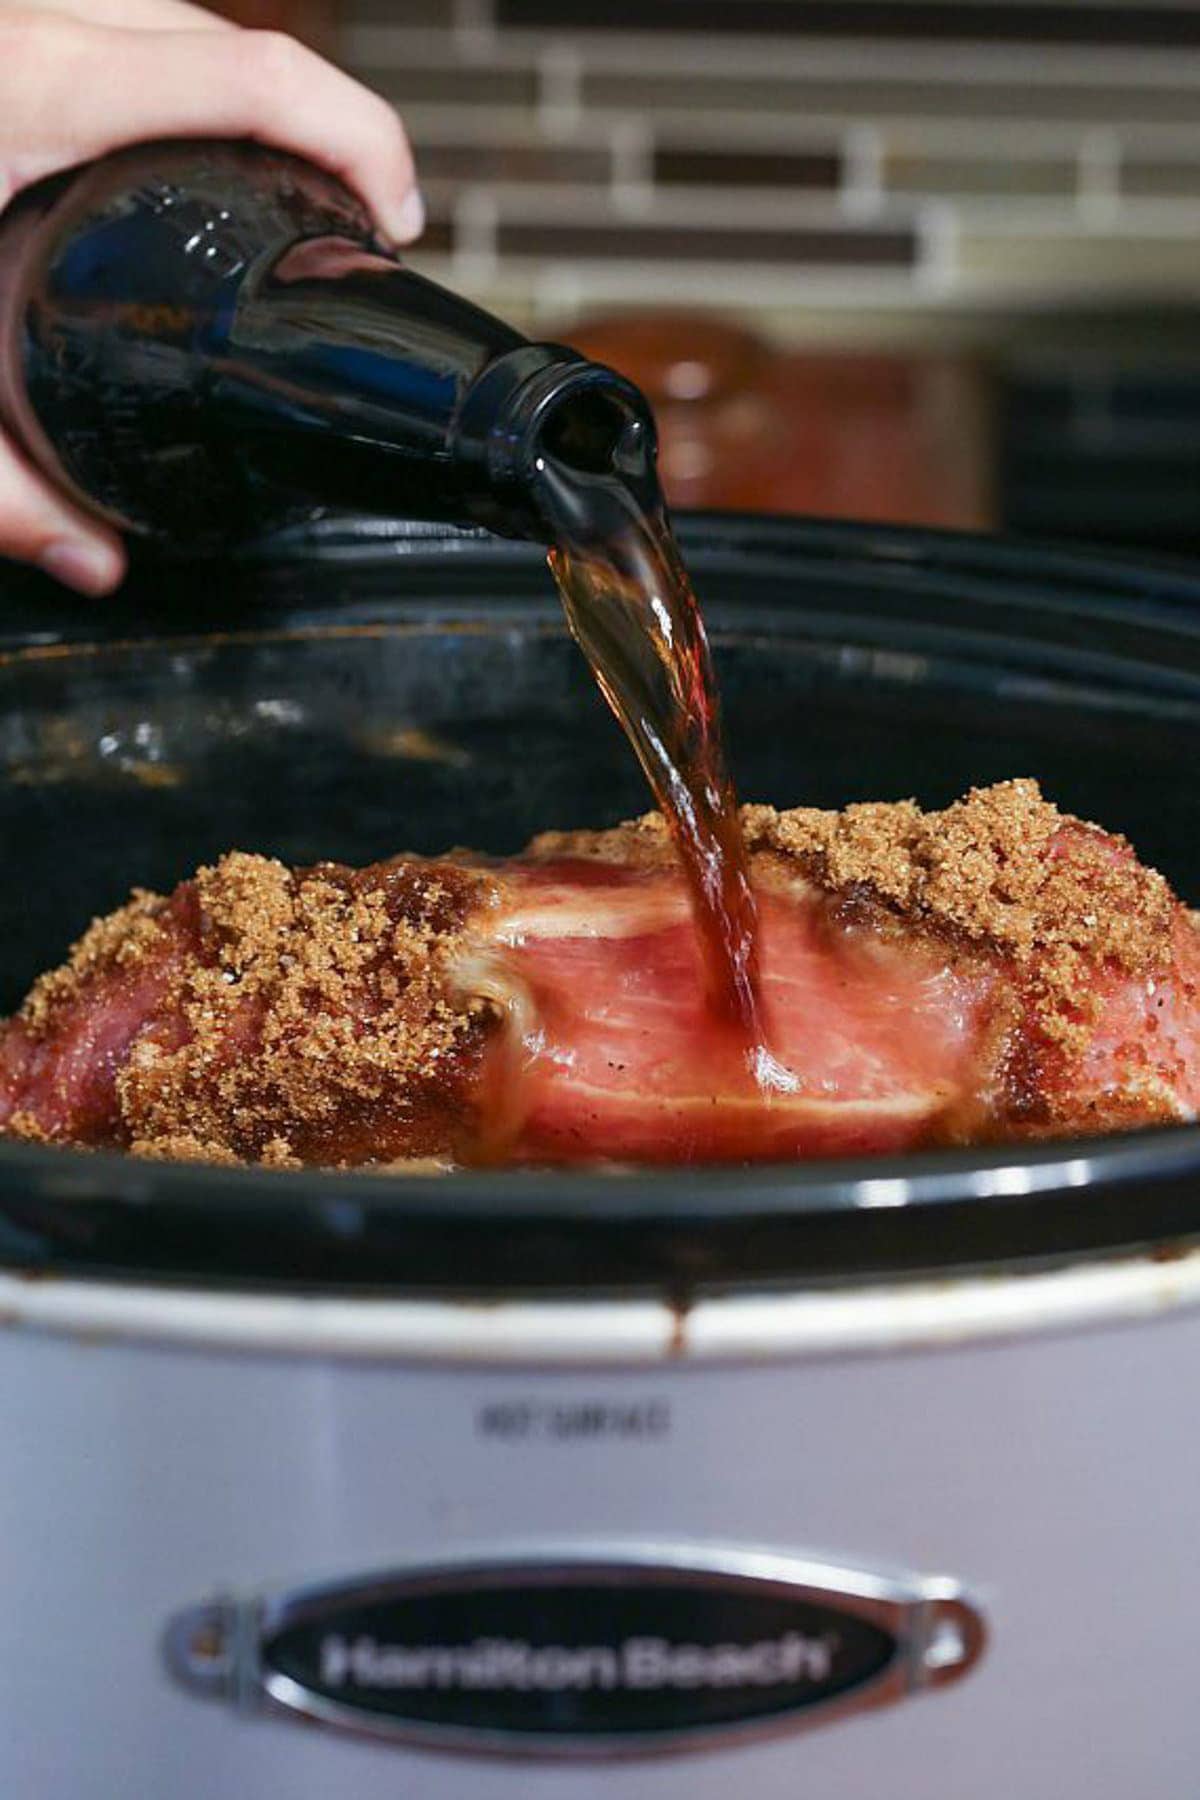 Root beer added to pork in a slow cooker